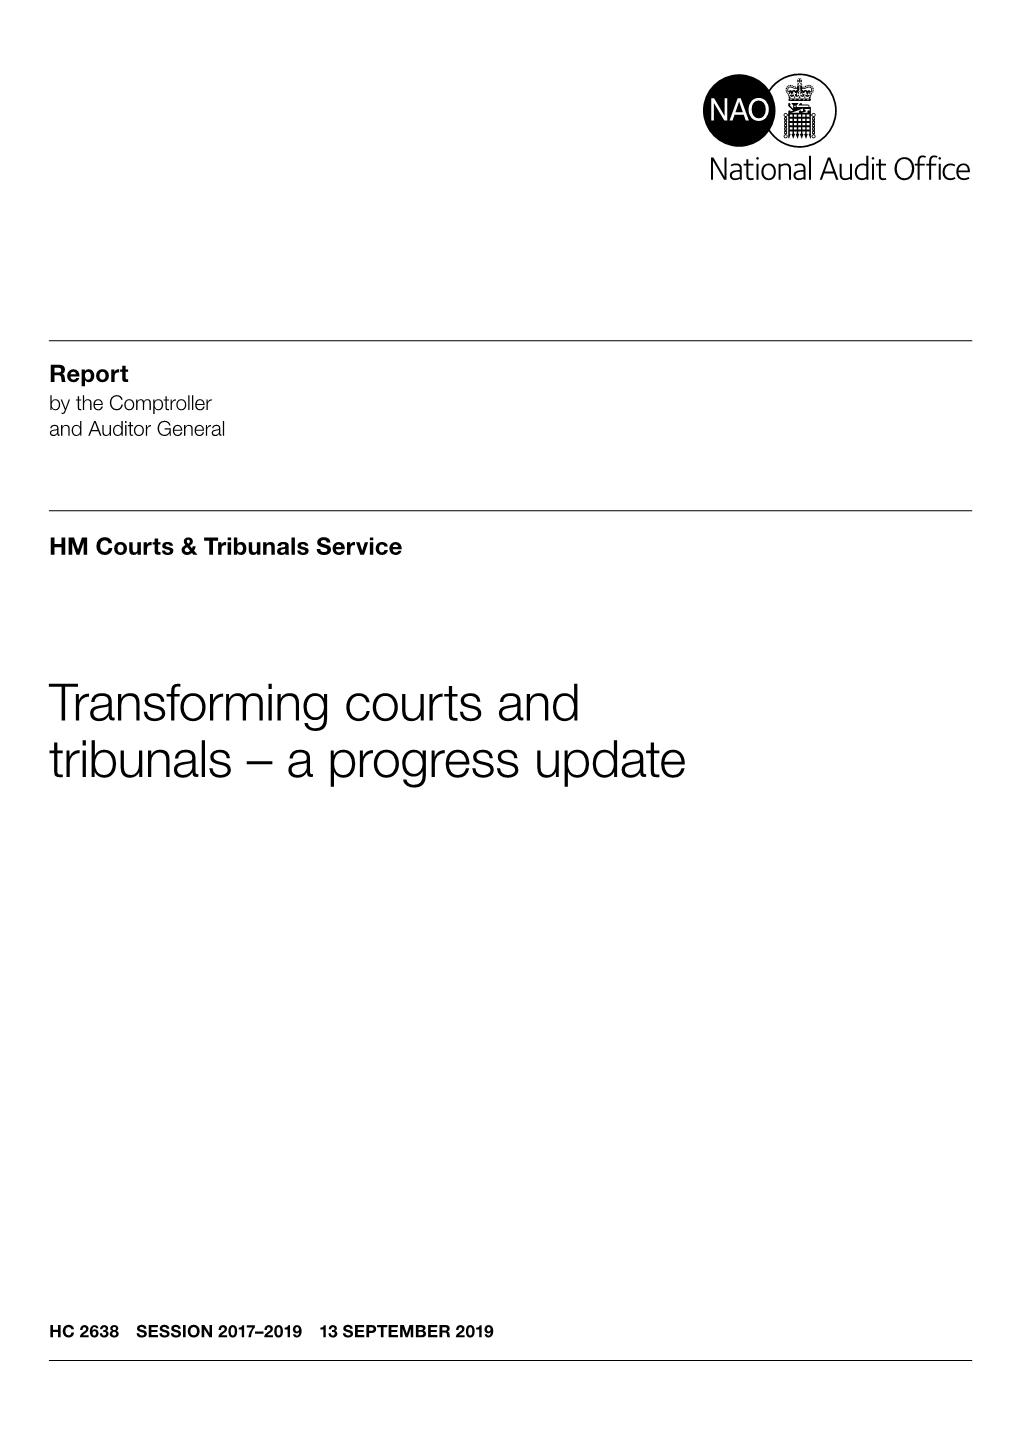 Transforming Courts and Tribunals – a Progress Update